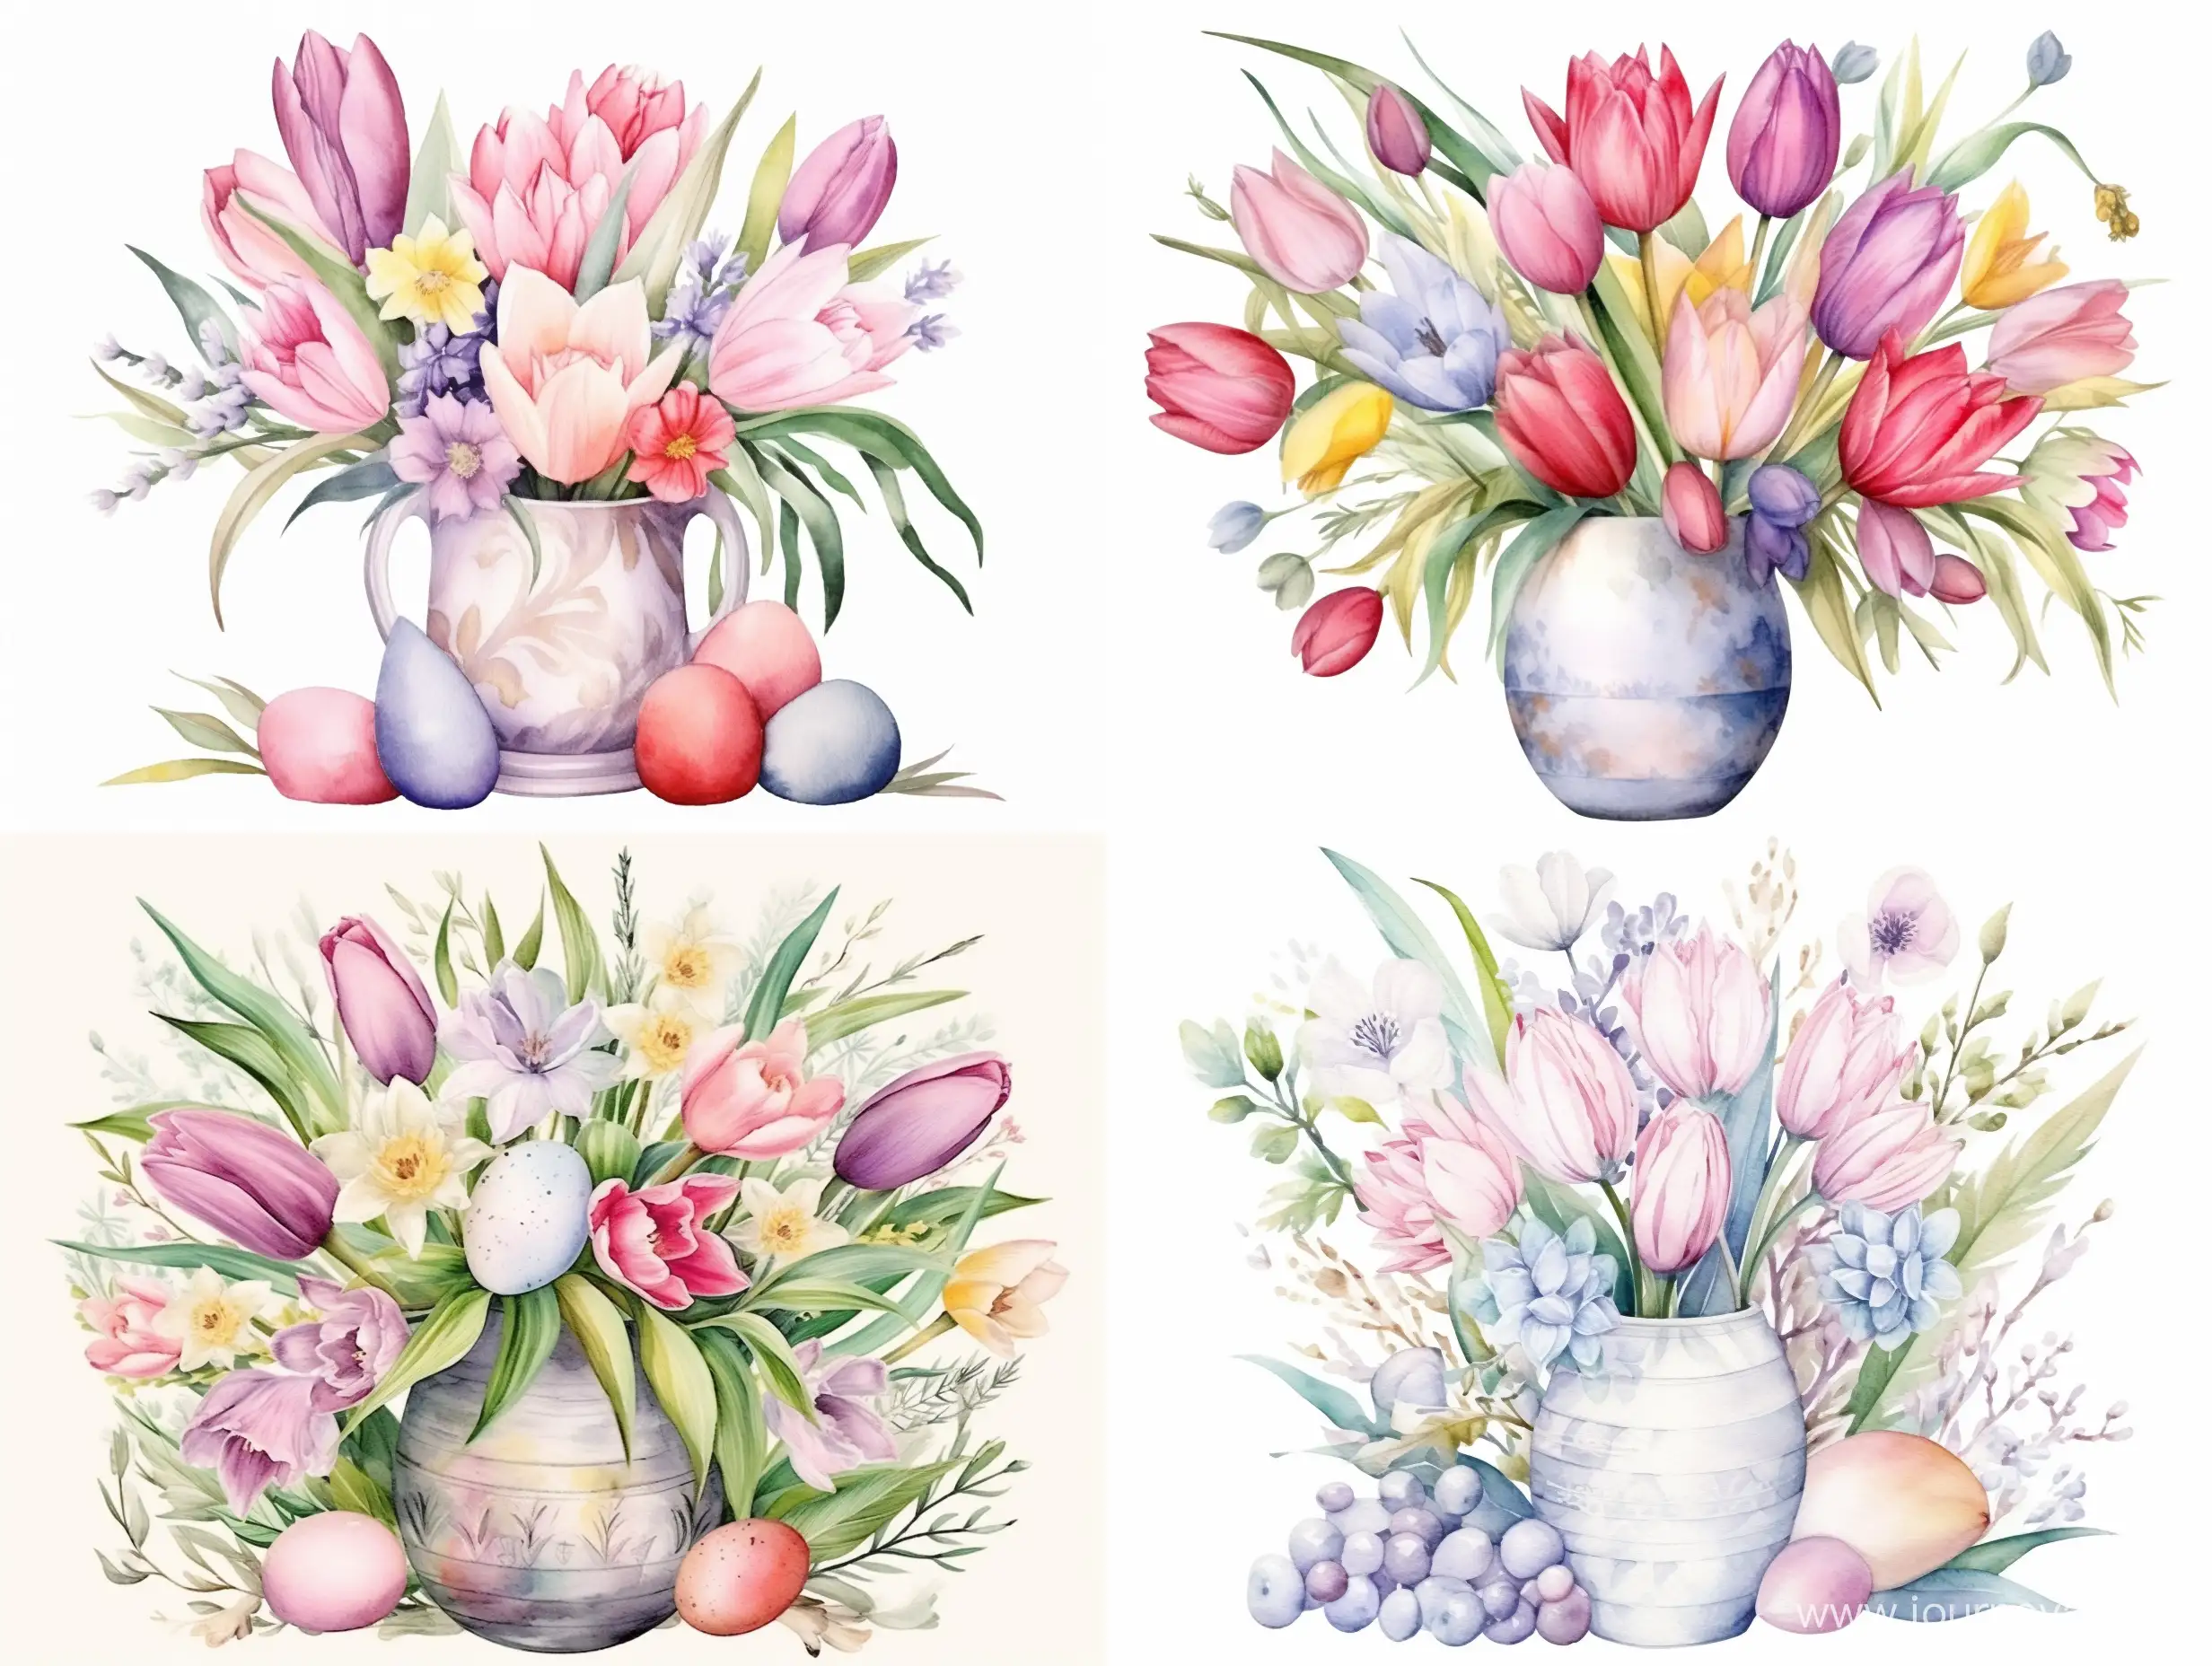 Watercolor happy easter vase illustration with flowers, feathers and eggs. Spring holiday decoration. April boho design